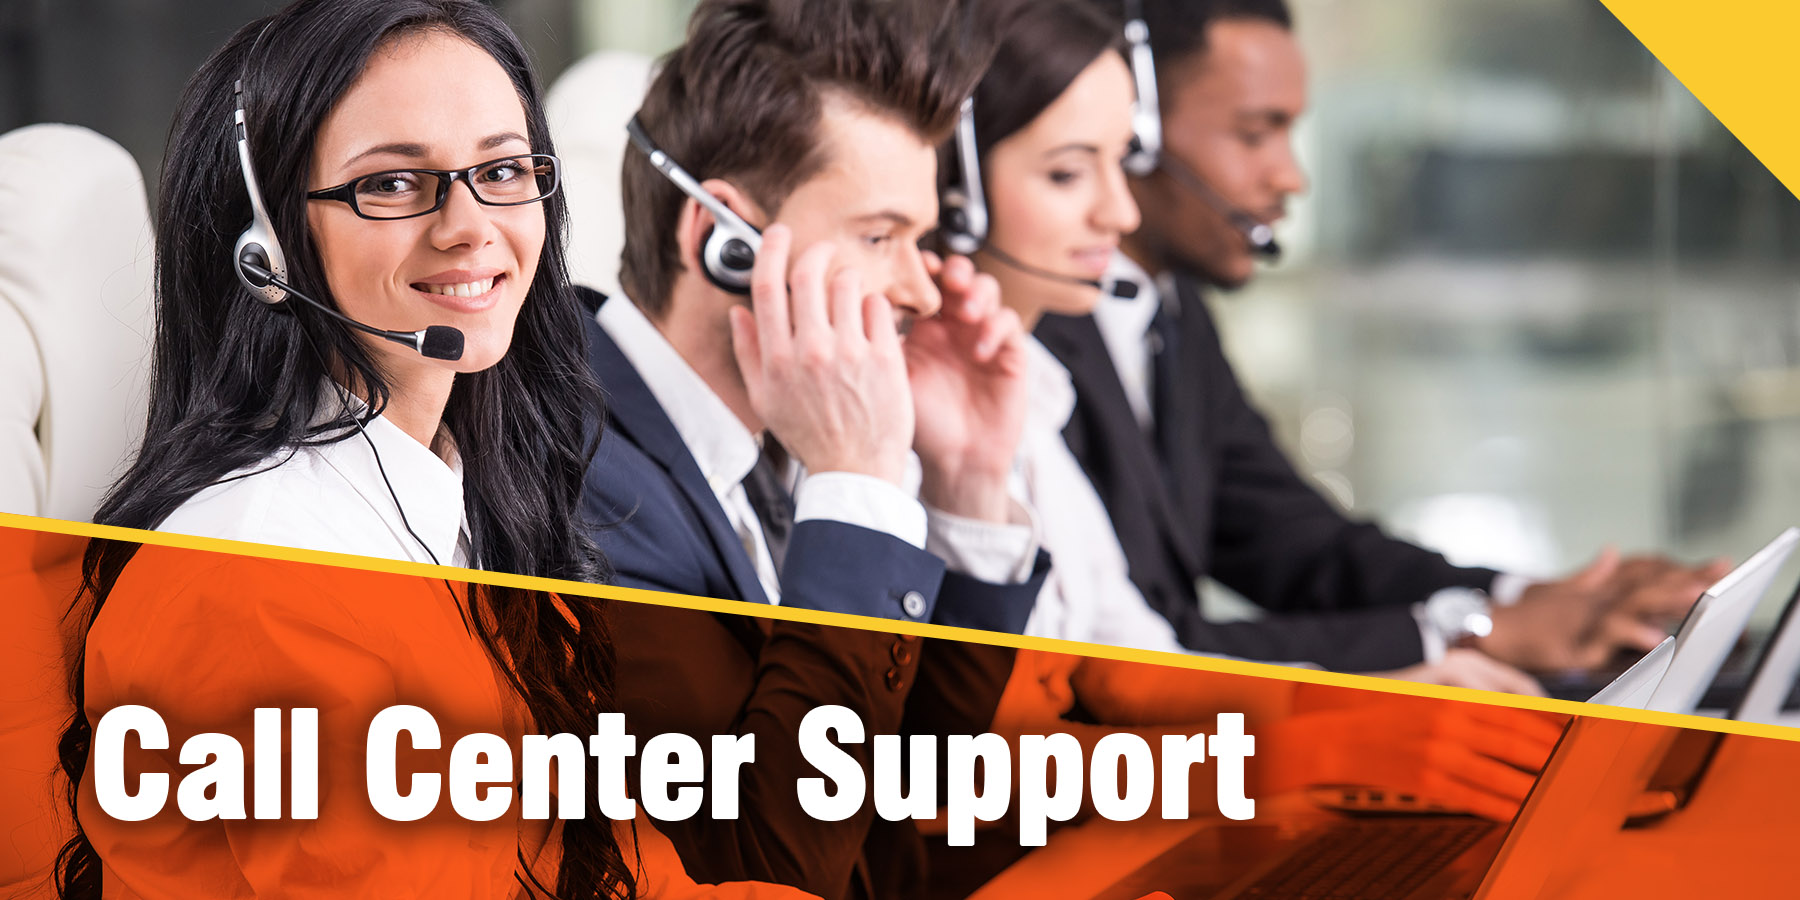 Call Center Support